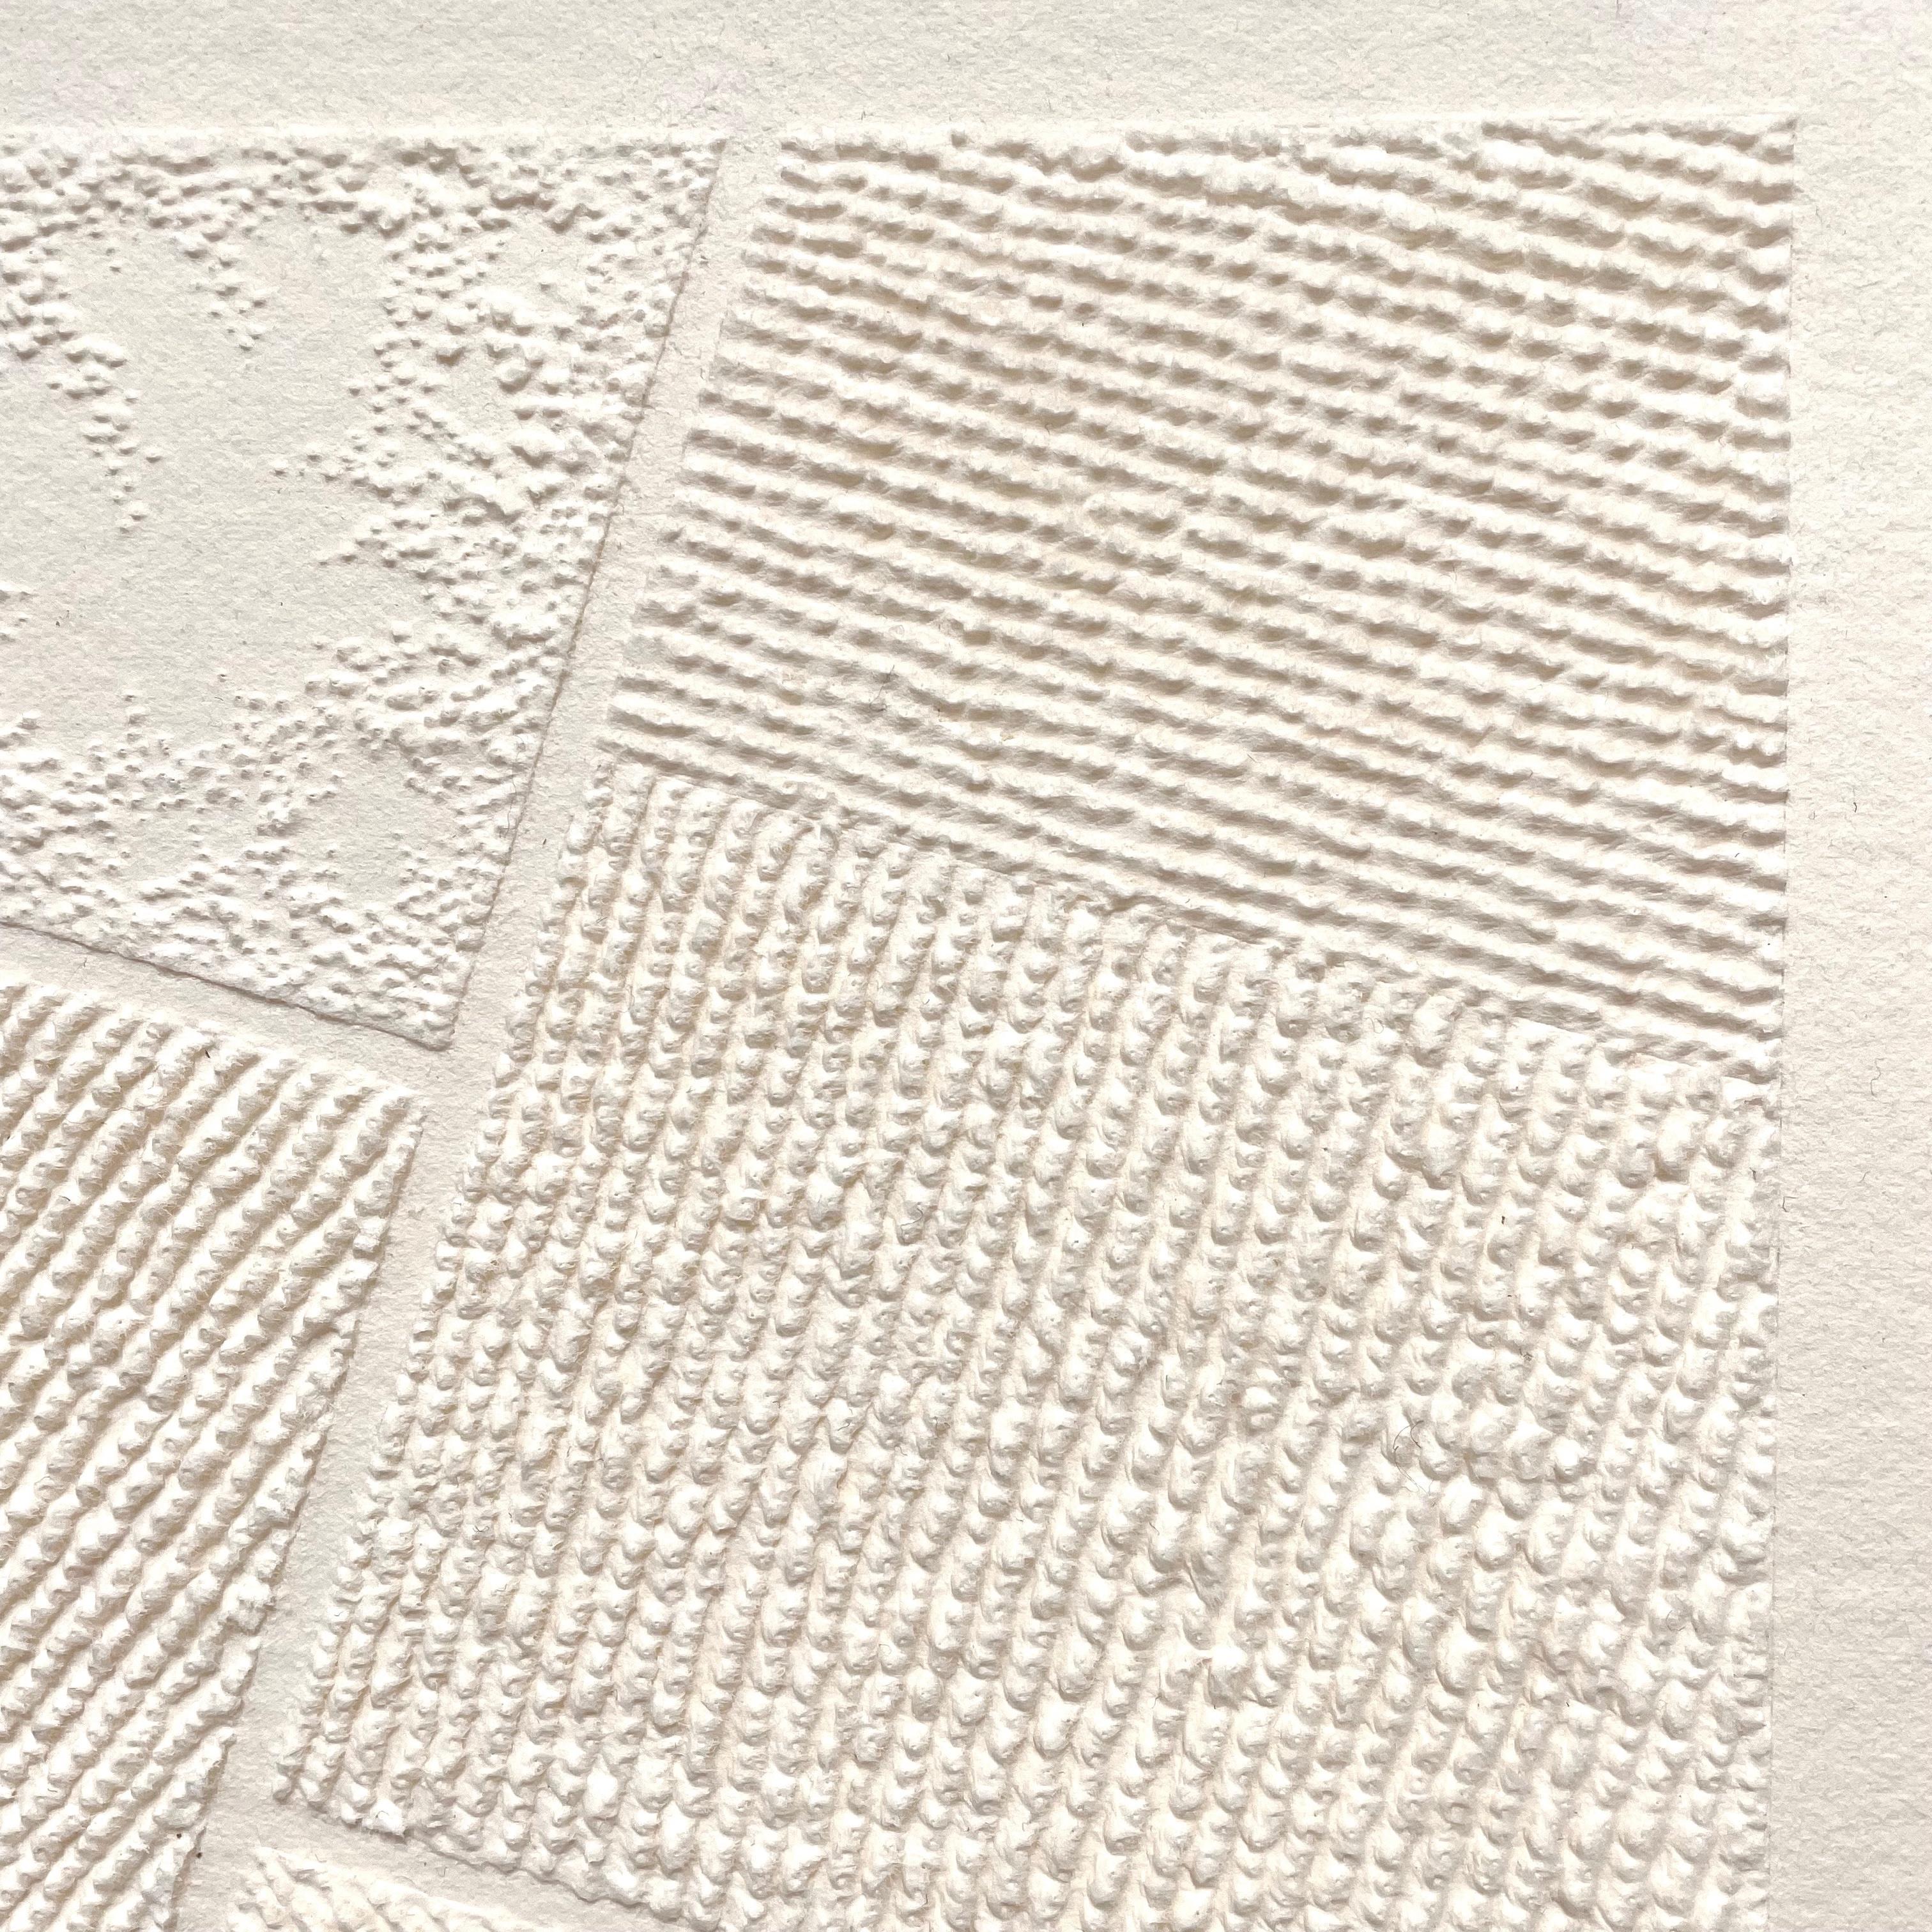 T #8- intricate beige 3D abstract aerial landscape pulled paper fiber drawing - Abstract Geometric Art by Antonin Anzil